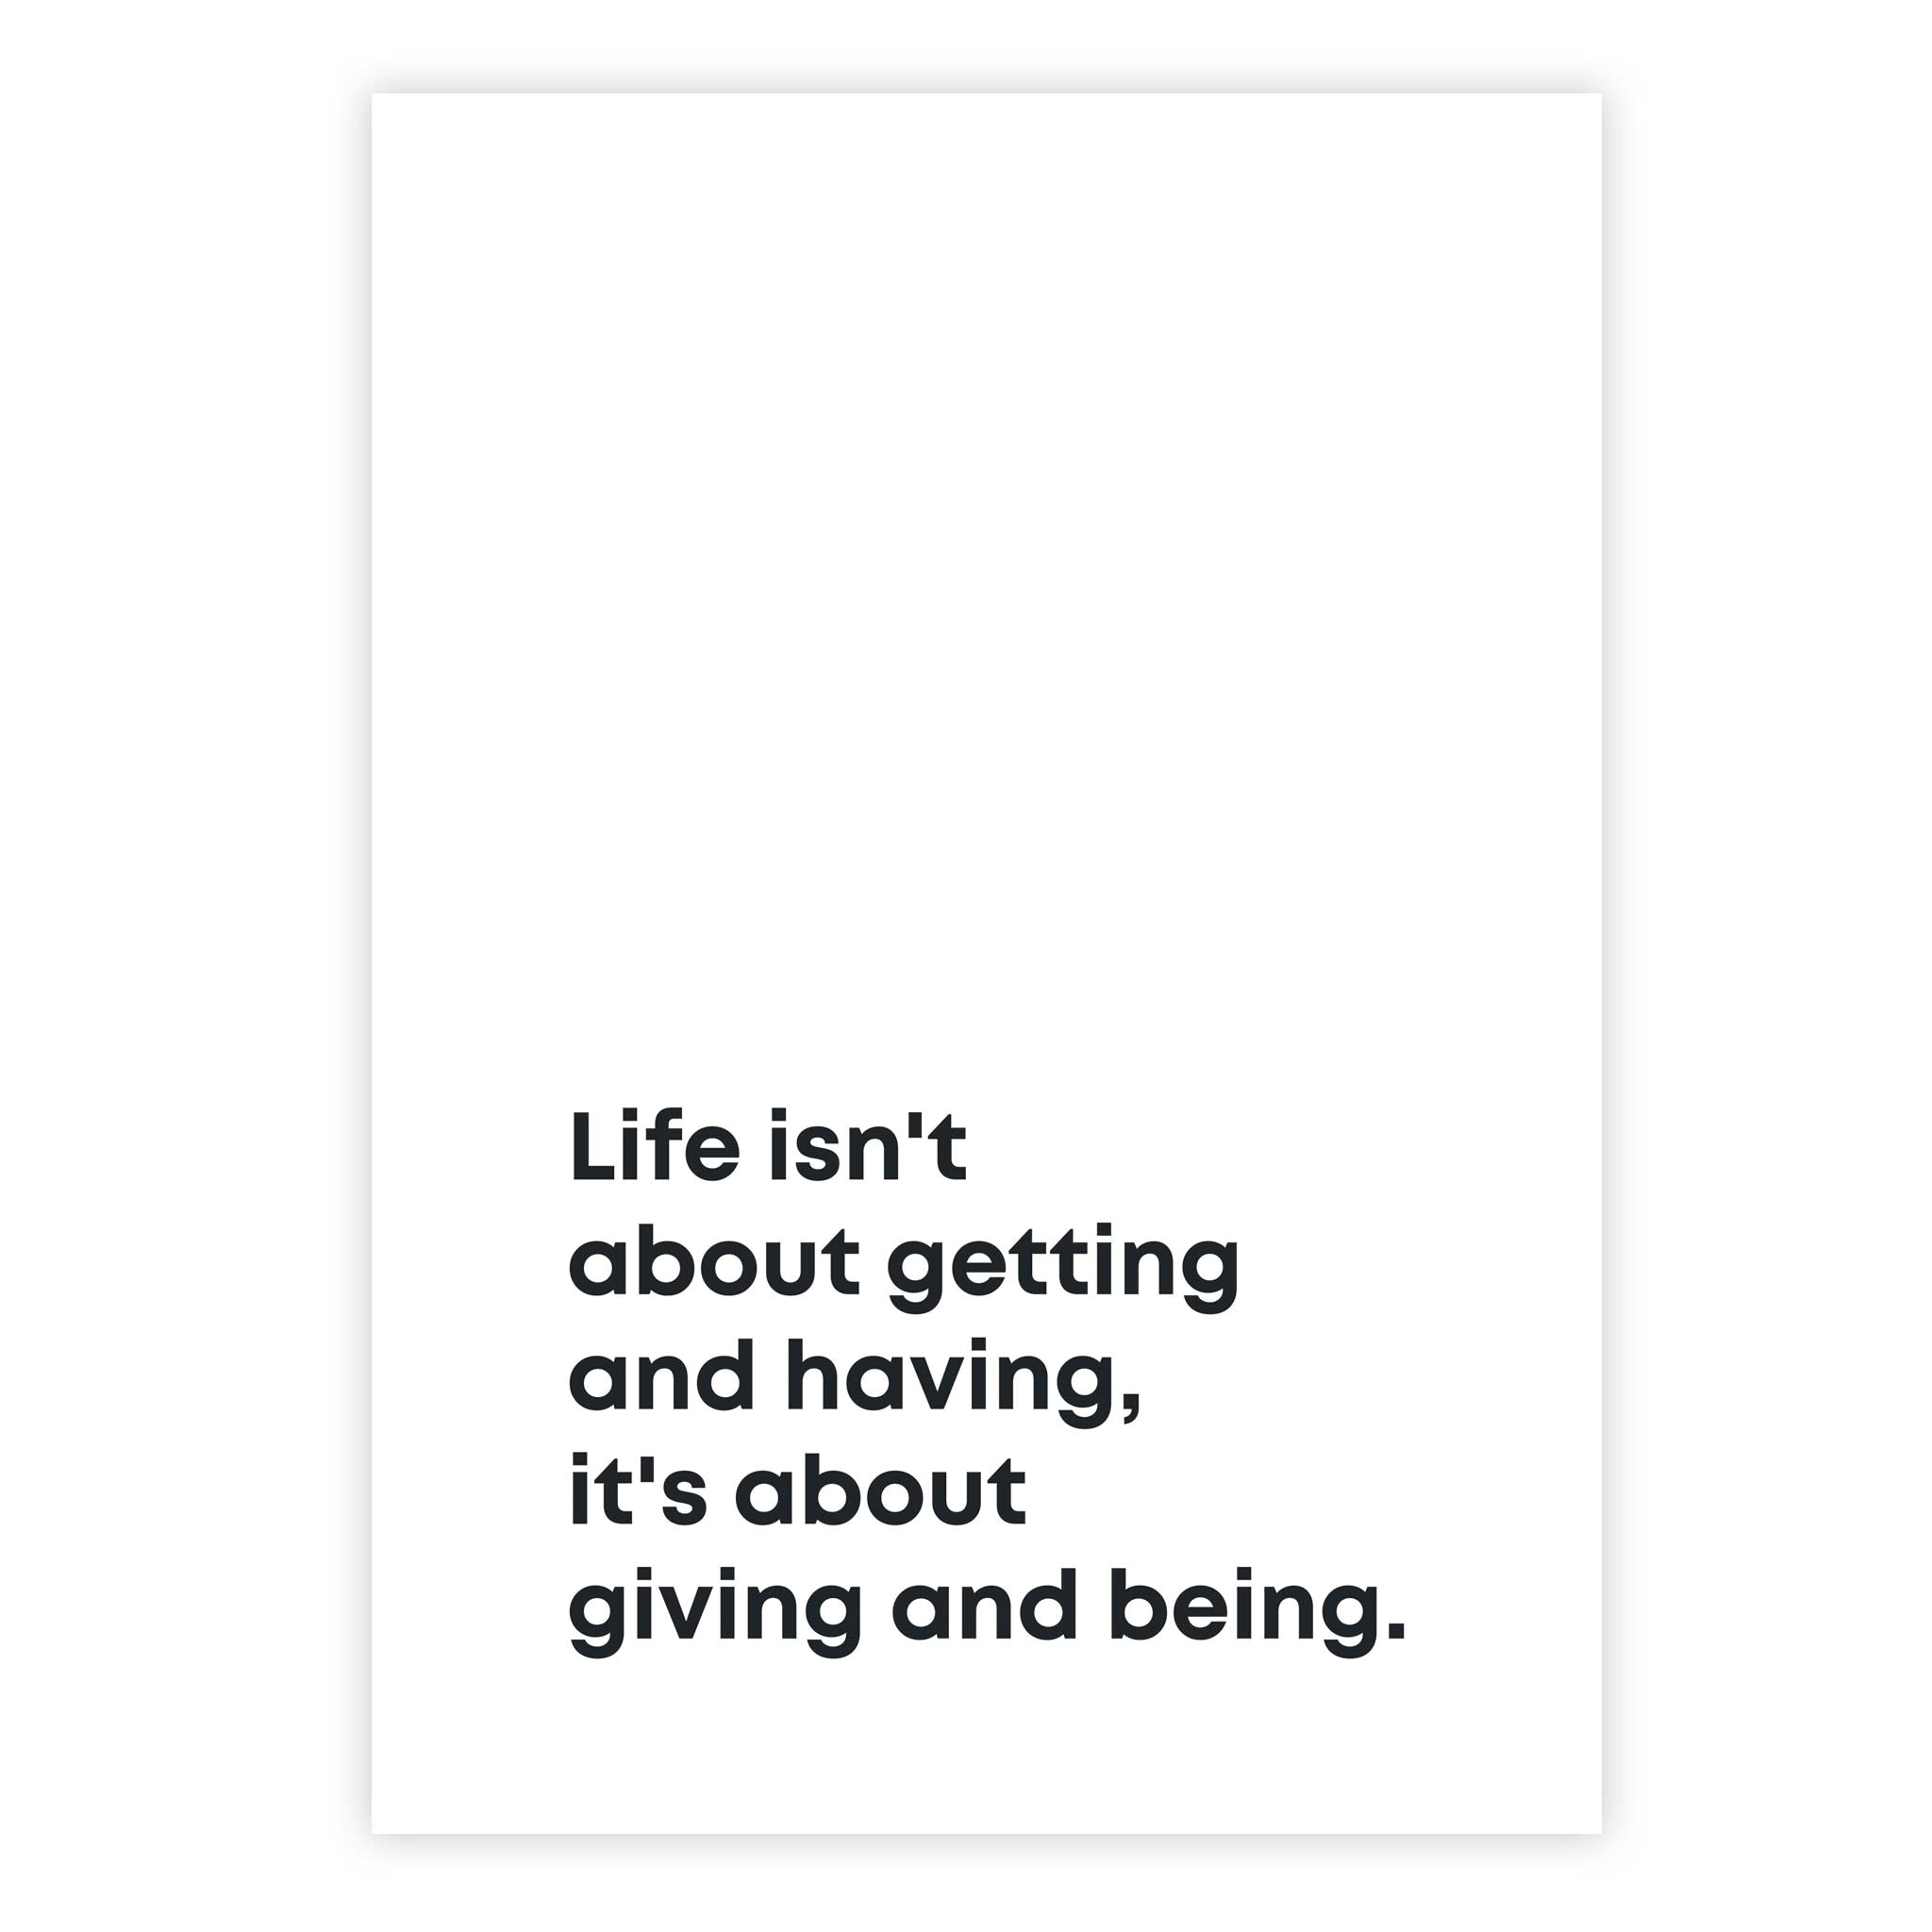 Life isn't about getting and having, it's about giving and being